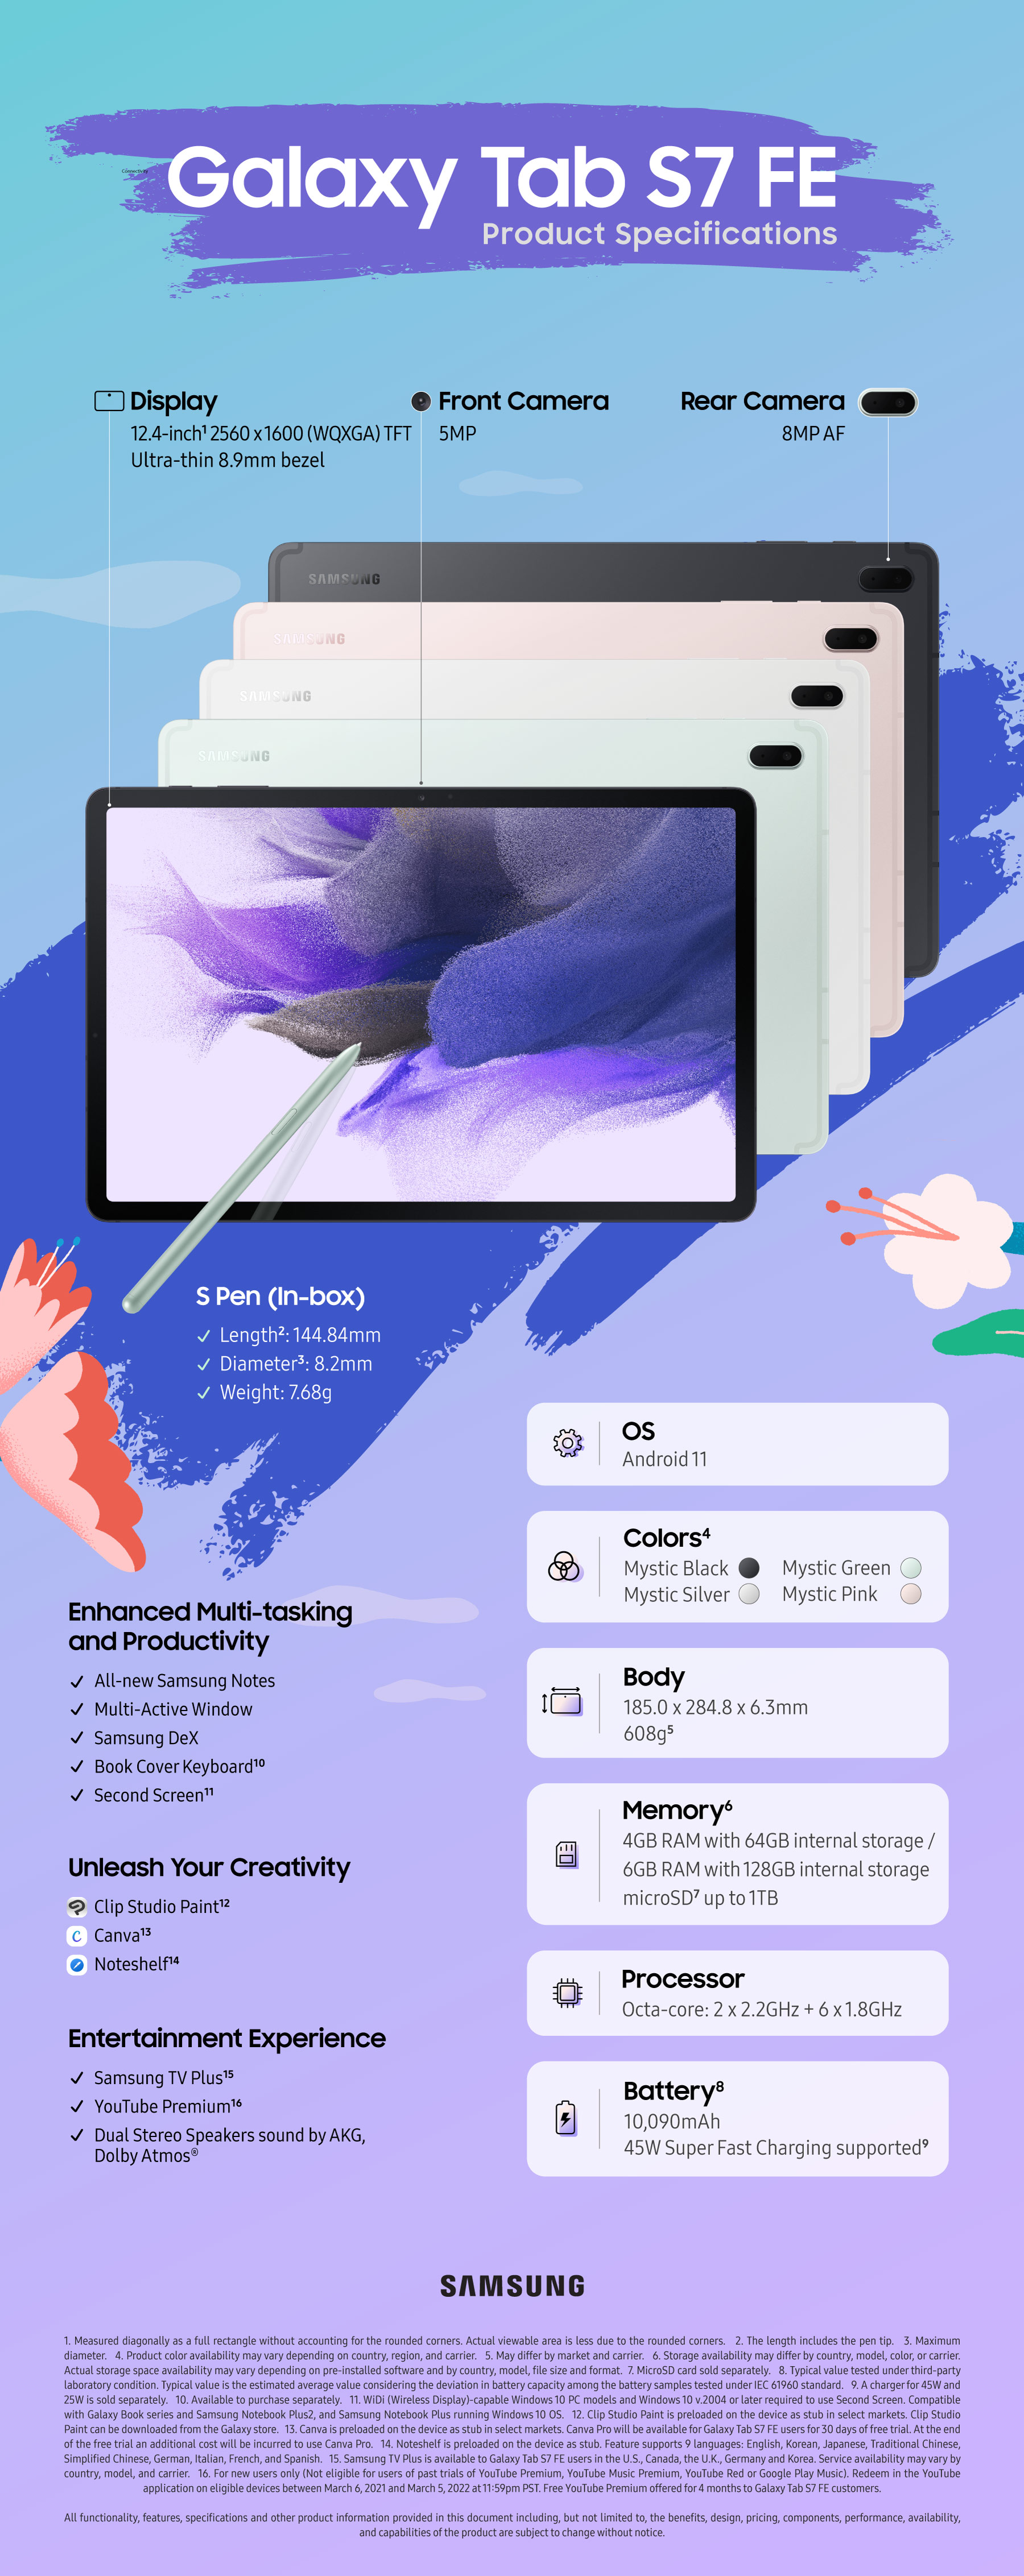 Galaxy Tab S7 FE Product Specifications Infographic